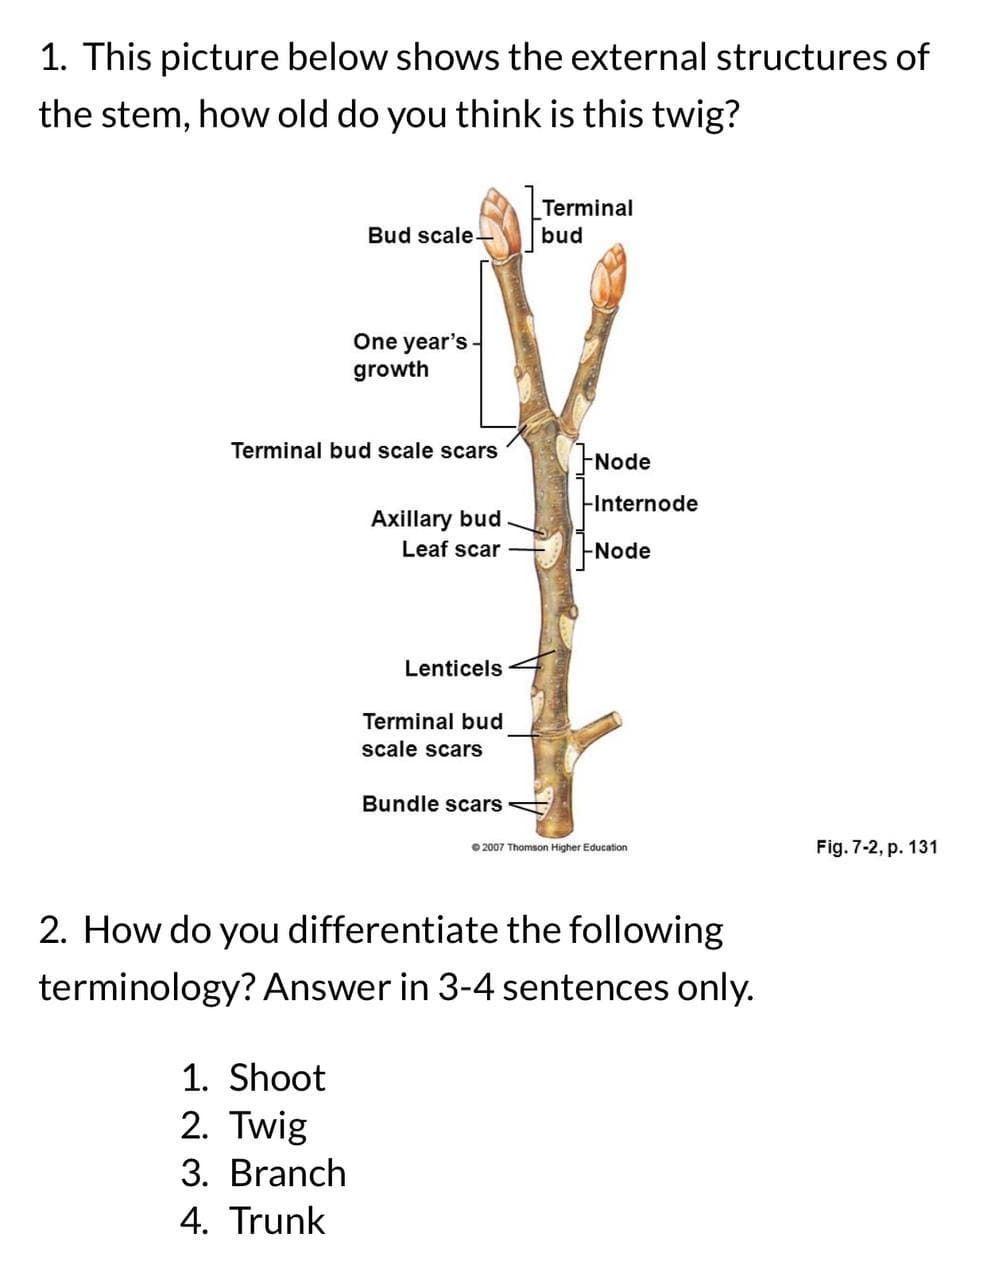 1. This picture below shows the external structures of
the stem, how old do you think is this twig?
Bud scale-
One year's-
growth
Terminal bud scale scars
1. Shoot
2. Twig
3. Branch
4. Trunk
Axillary bud
Leaf scar
Lenticels
Terminal bud
scale scars
Bundle scars
Terminal
bud
Node
-Internode
-Node
Ⓒ2007 Thomson Higher Education
2. How do you differentiate the following
terminology? Answer in 3-4 sentences only.
Fig. 7-2, p. 131